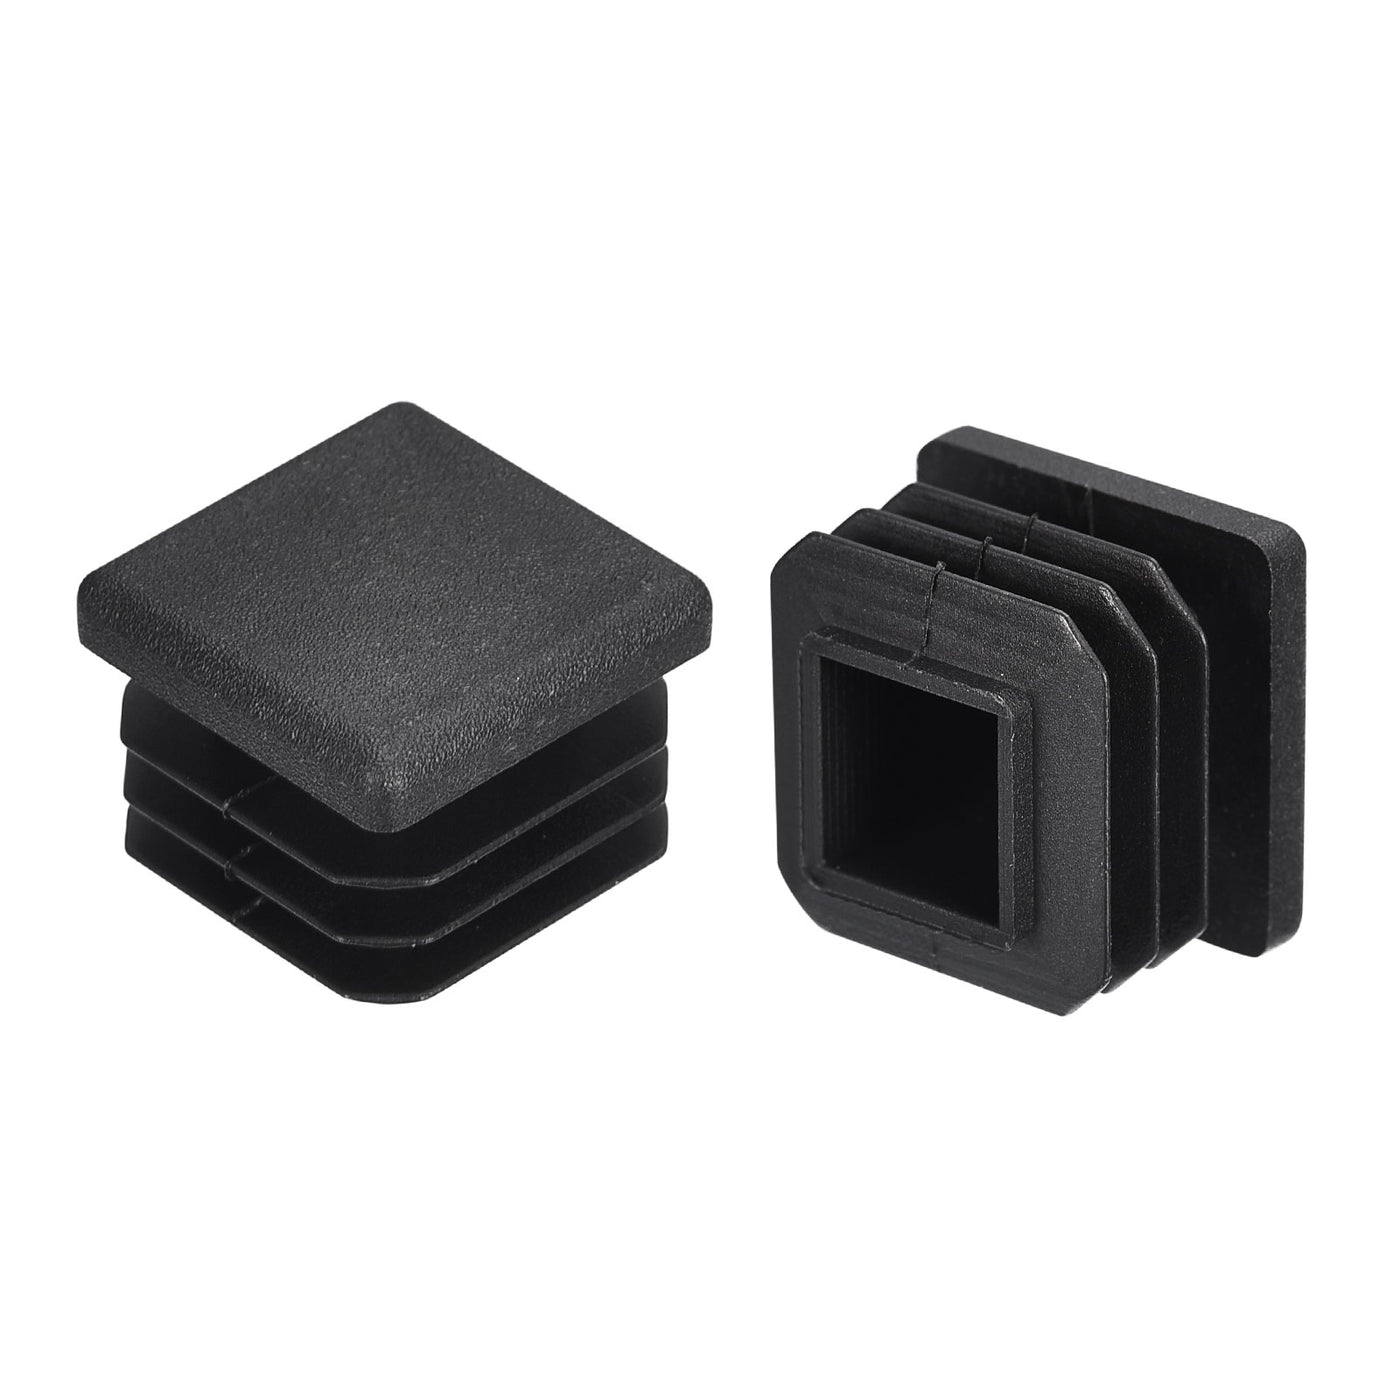 uxcell Uxcell 4Pcs 20mmx20mm(0.79inch) Plastic Tubing Plug Square Post End Caps Black